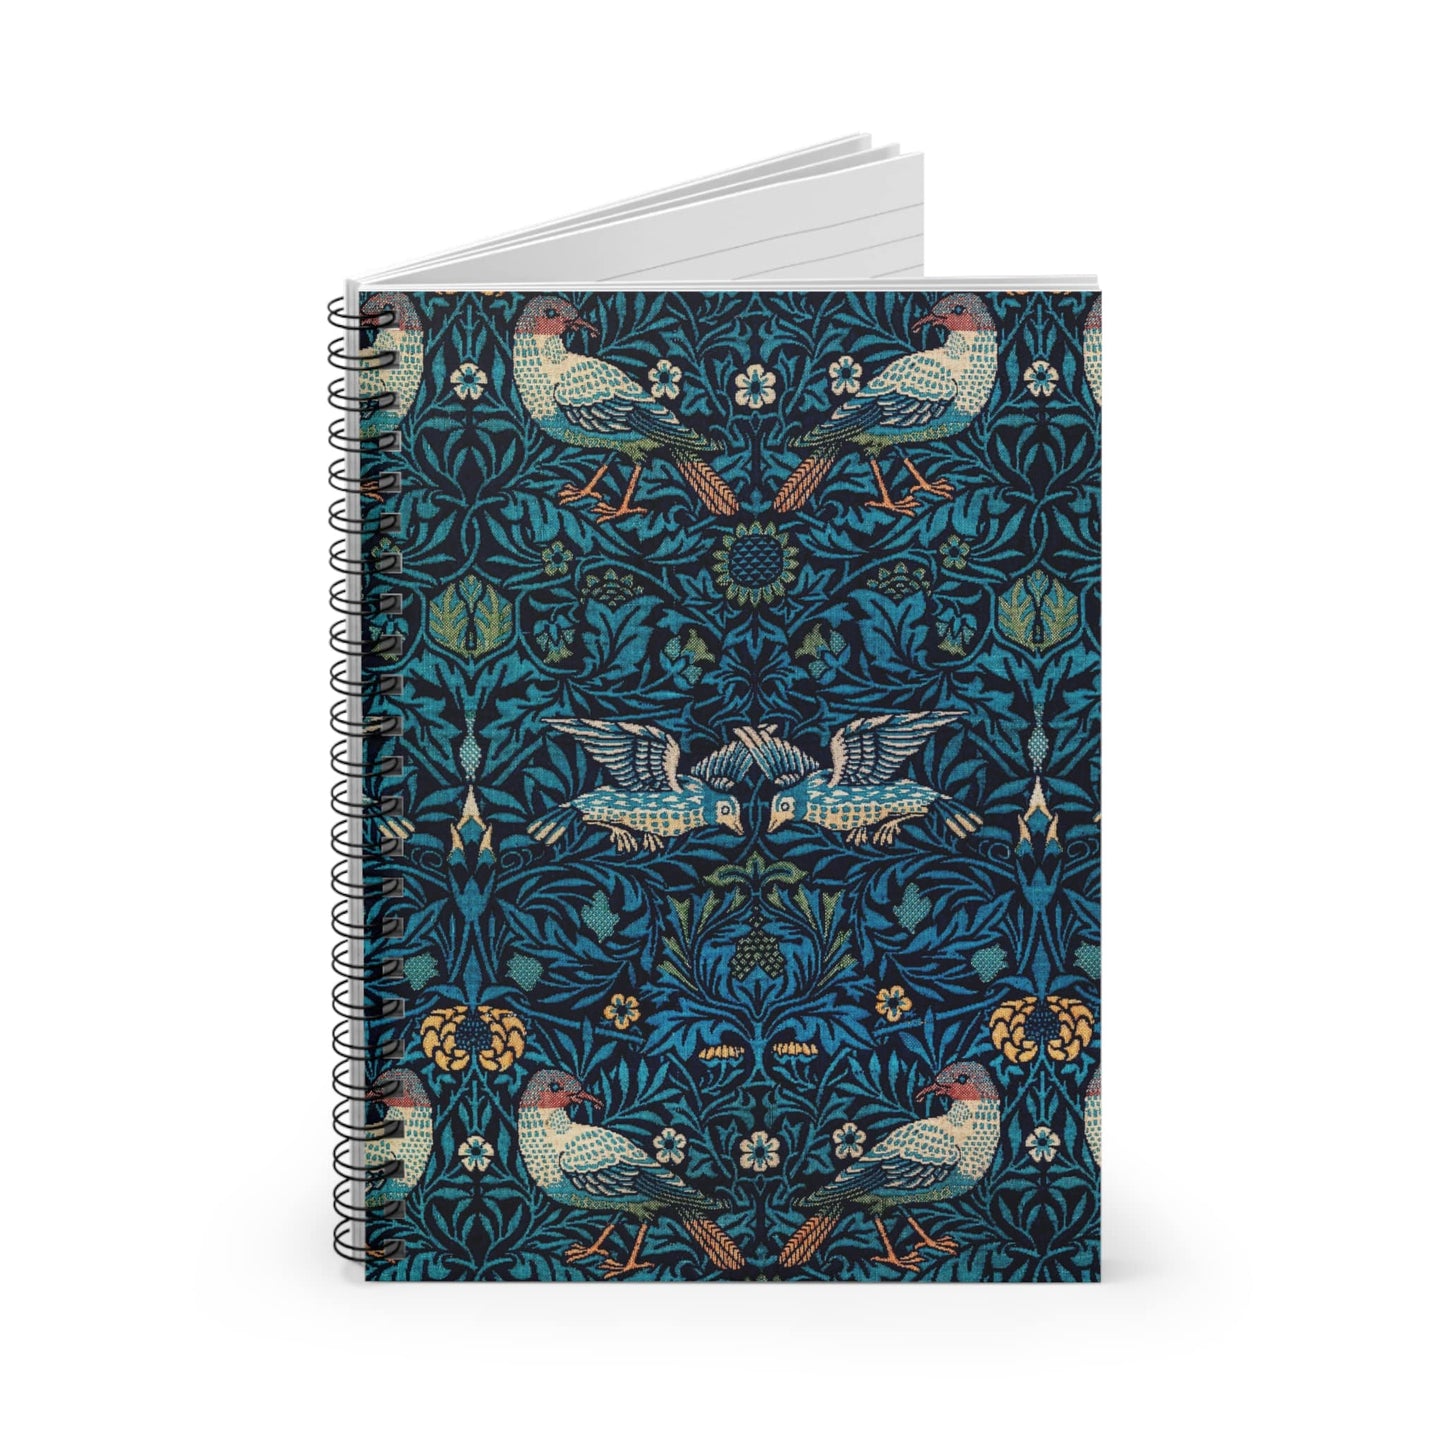 Blue Nature Pattern Spiral Notebook Standing up on White Desk